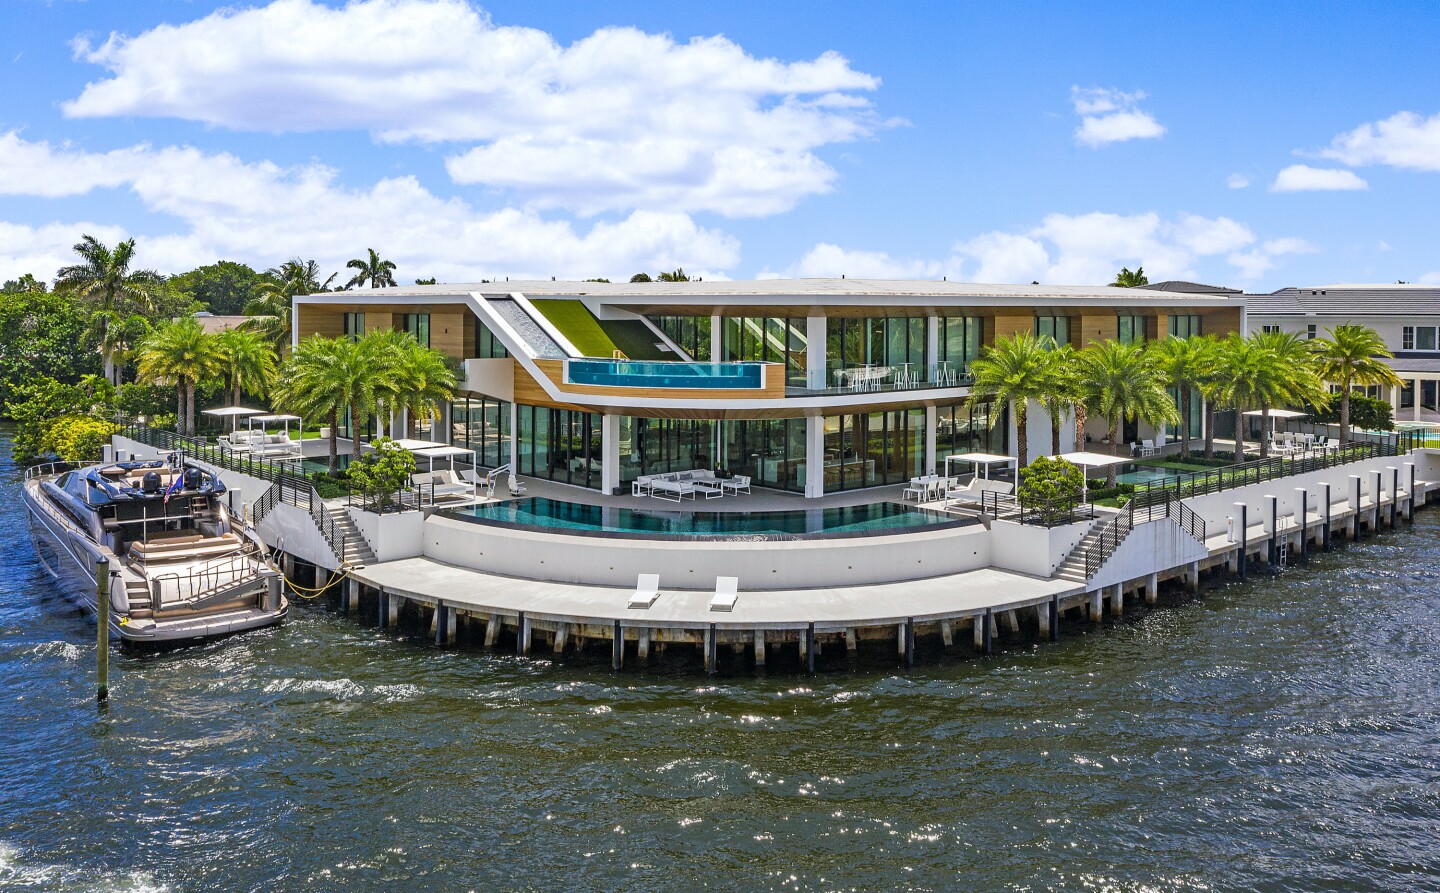 Built in 2019, the wood-and-glass mansion includes 343 feet of water frontage and four infinity pools, including one fed by a waterfall from the roof.